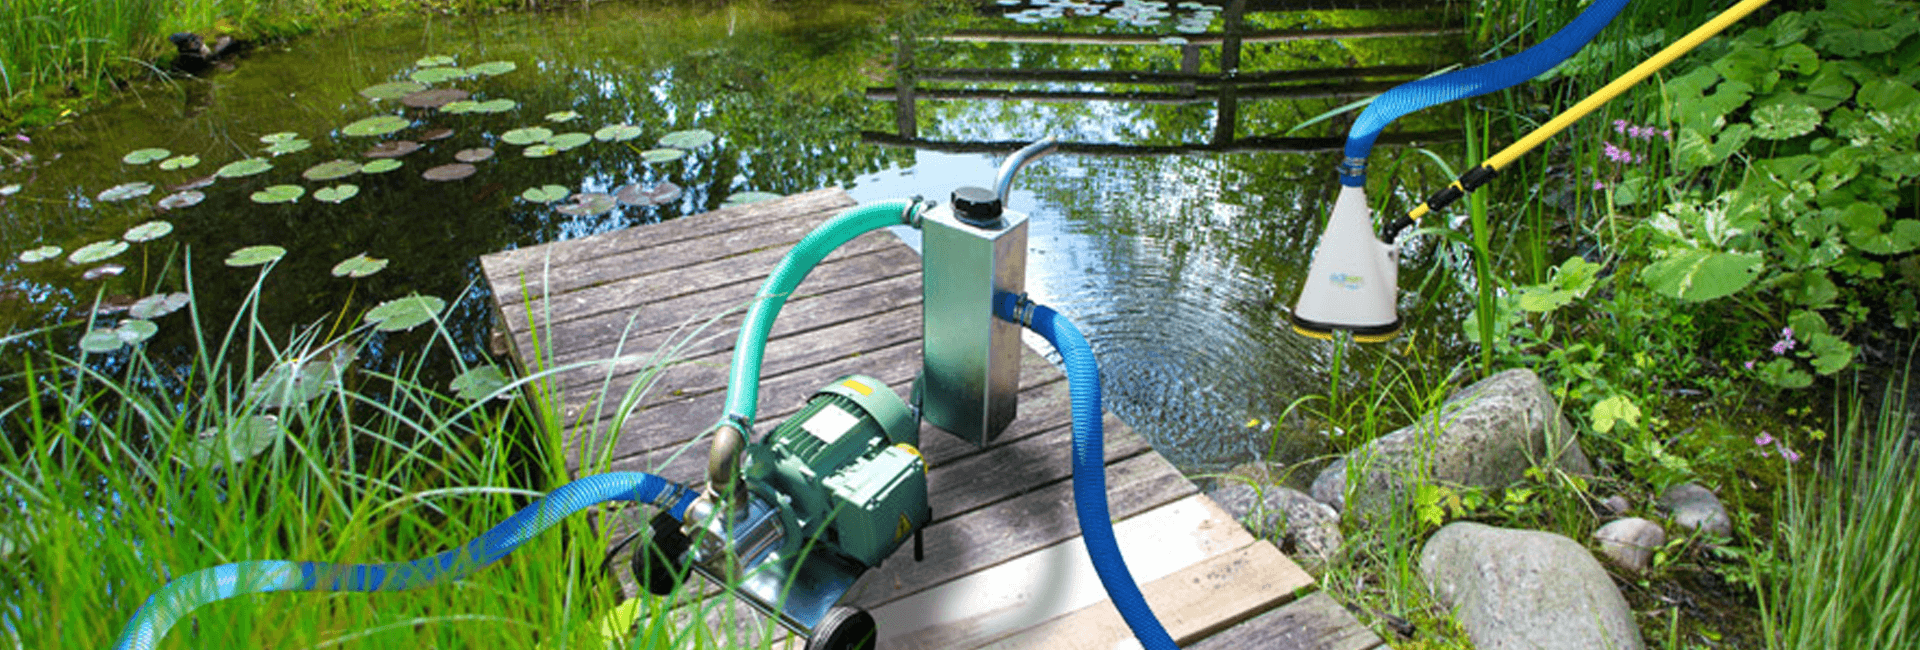 Pond Cleaning Device